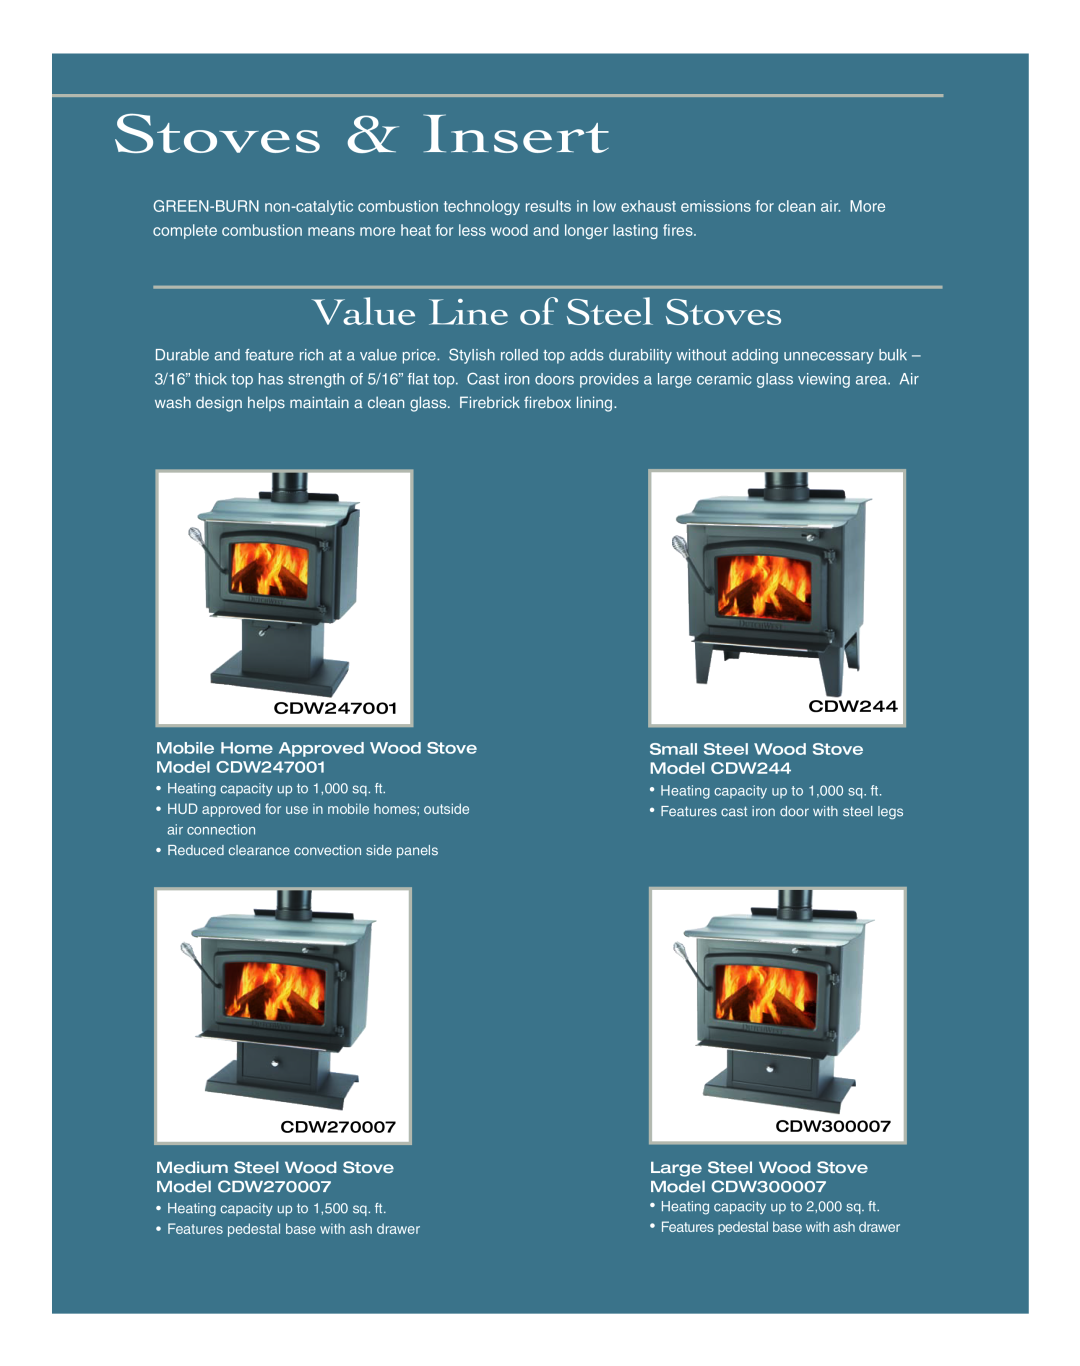 Vermont Casting CDW270007 Stoves & Insert, Value Line of Steel Stoves, Mobile Home Approved Wood Stove Model CDW247001 